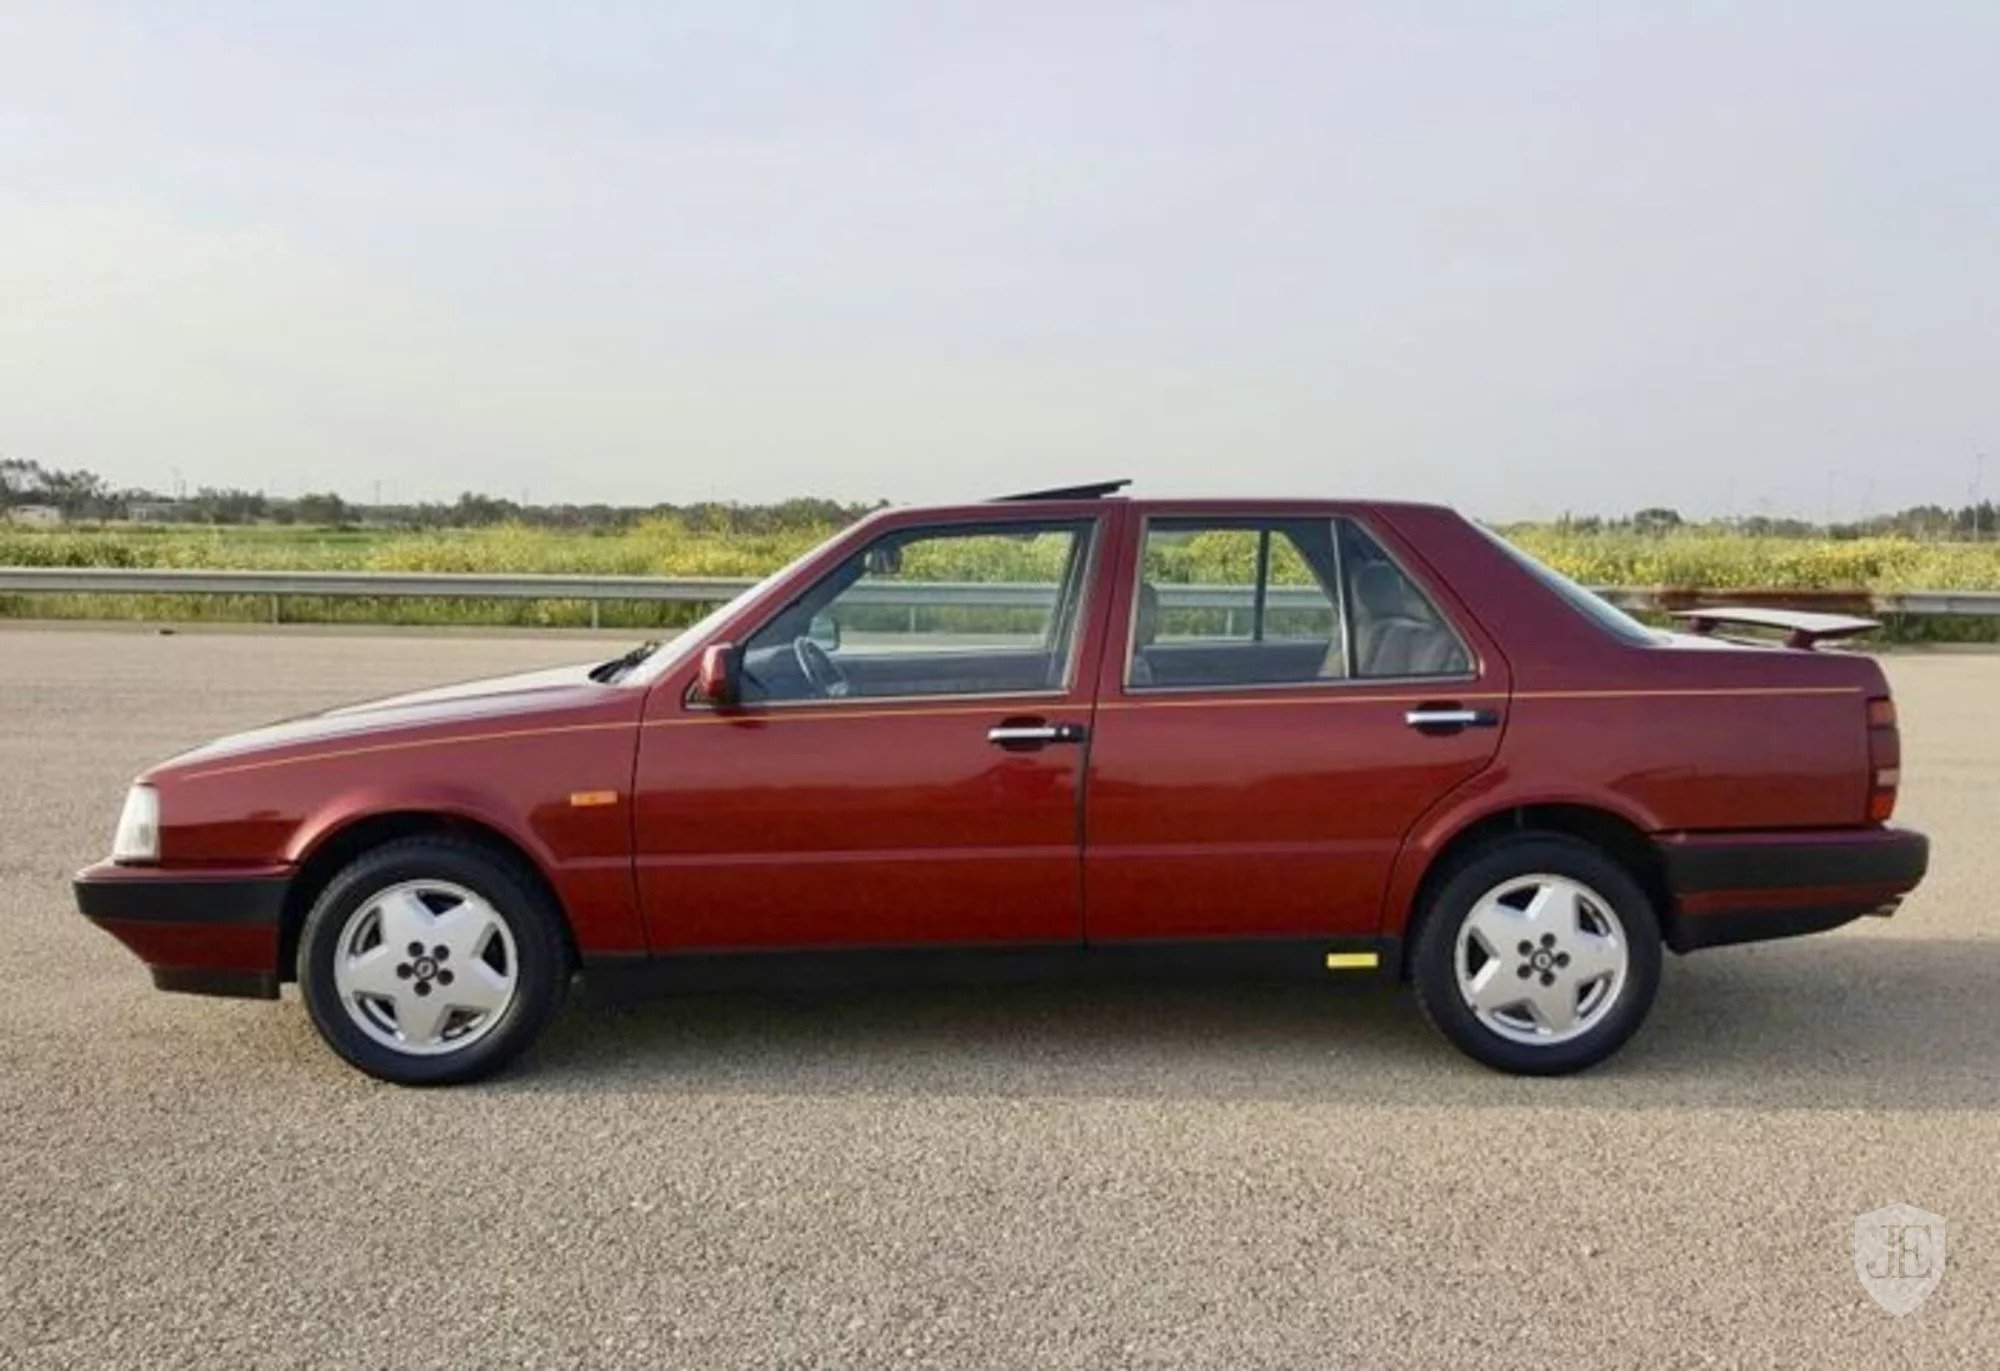 Two Owner Lancia Thema 832 Listed For Sale Autoevolution